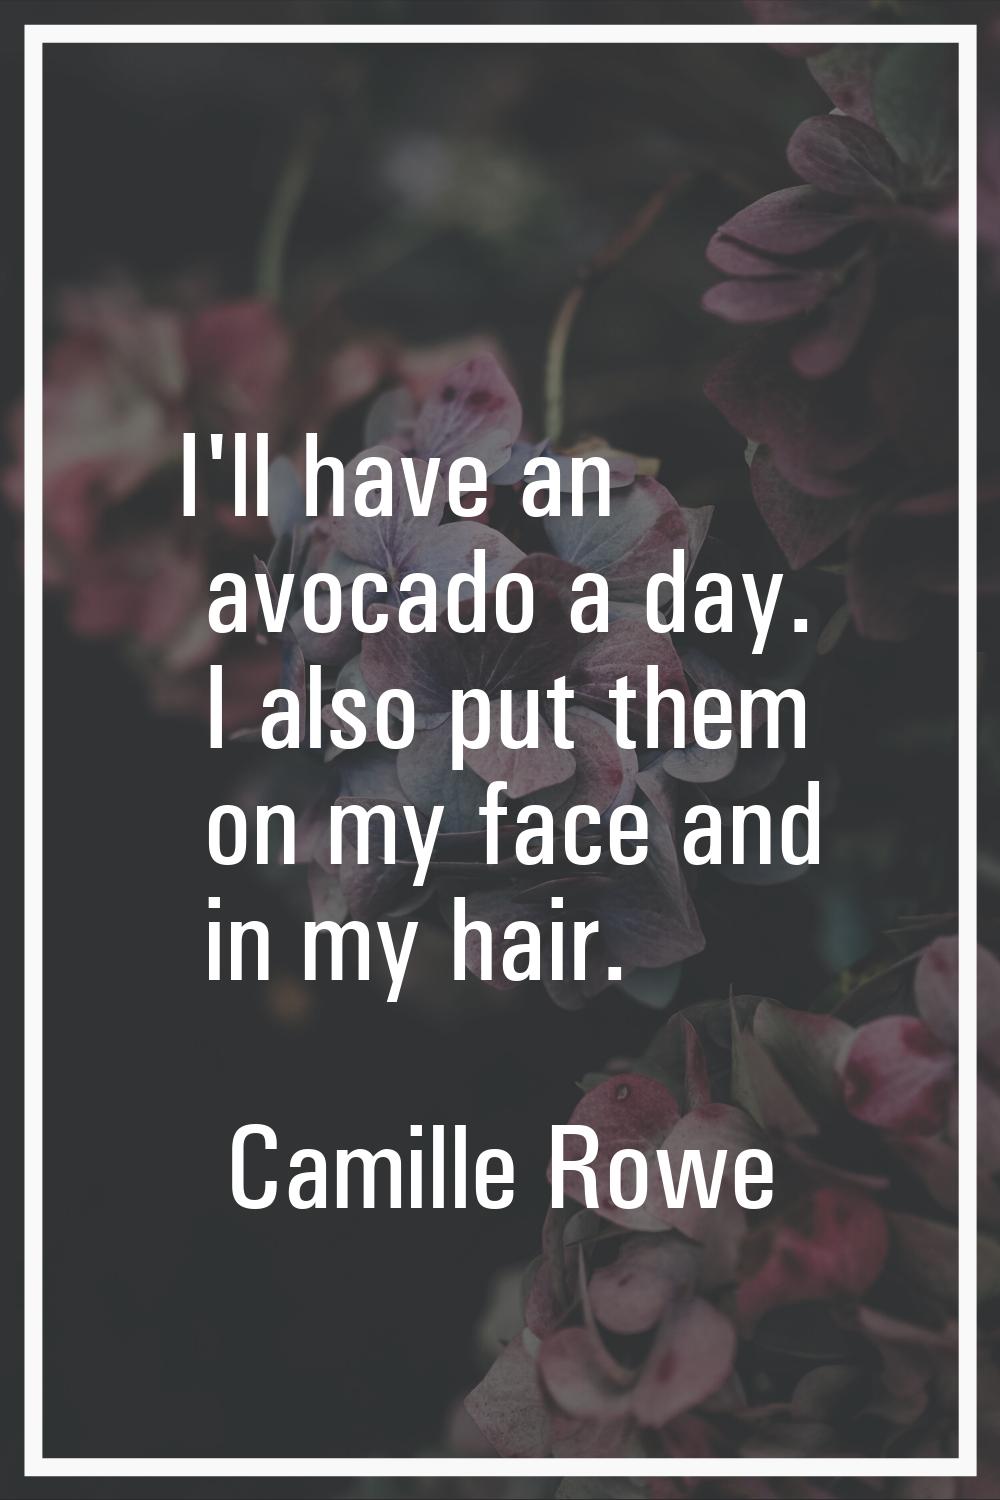 I'll have an avocado a day. I also put them on my face and in my hair.